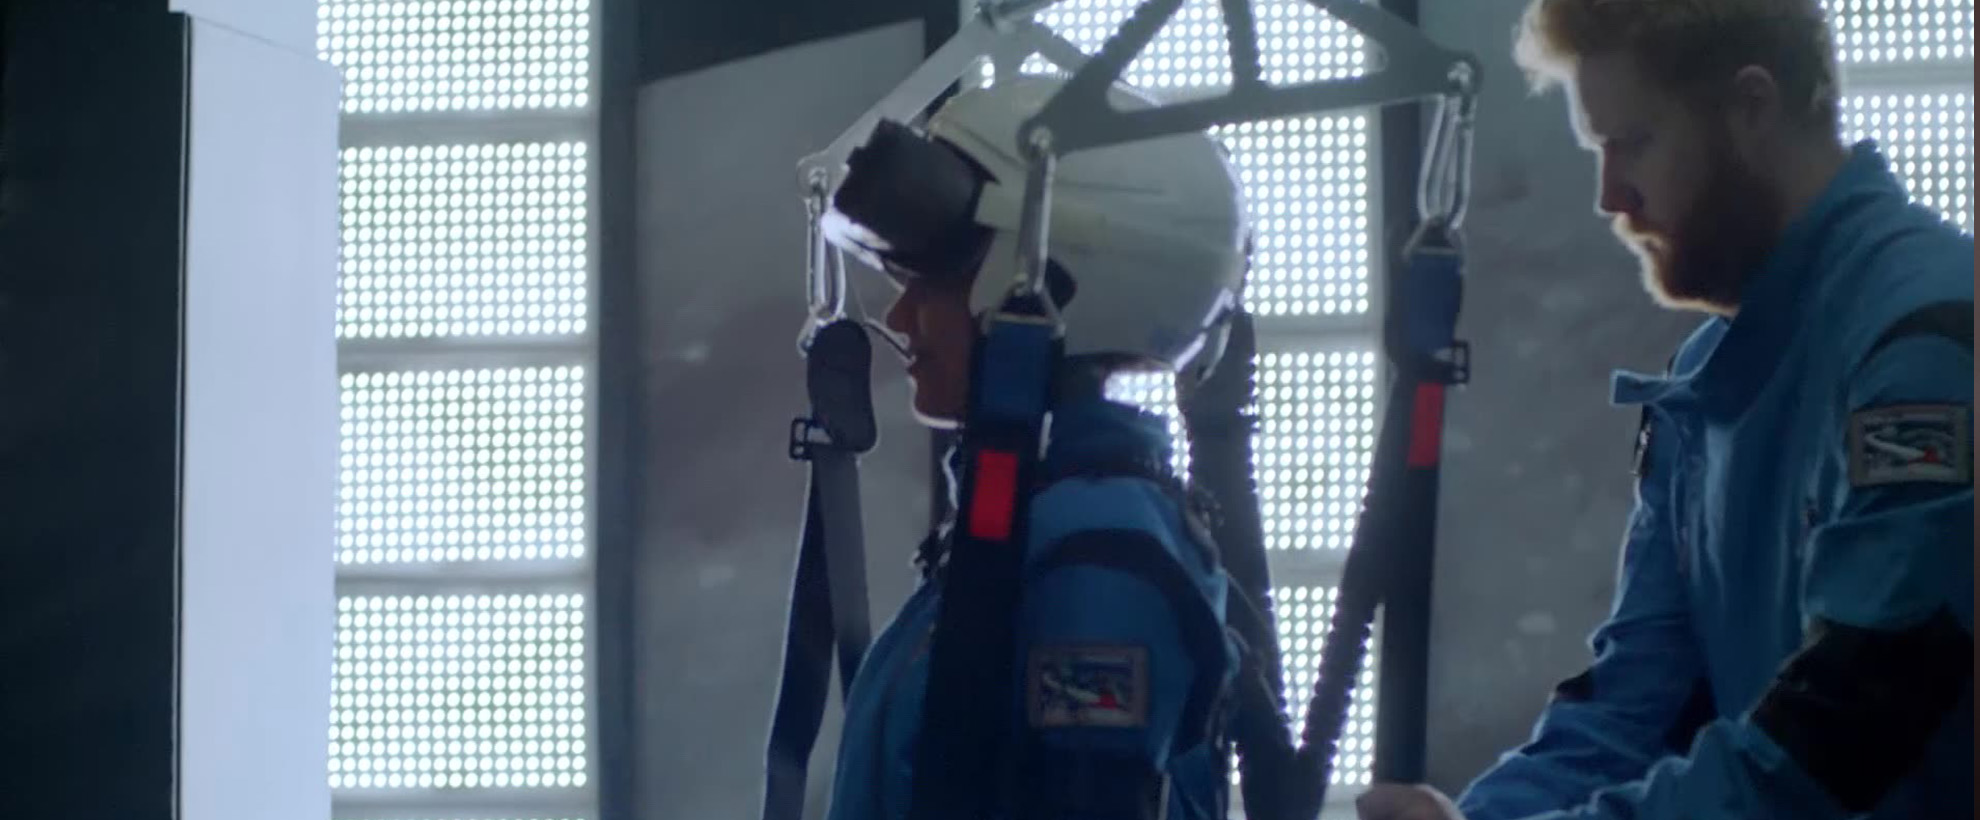 A woman in a white helmet and blue jumpsuit gets strapped into a harness by a red-headed man with a beard who is also in a blue jumpsuit